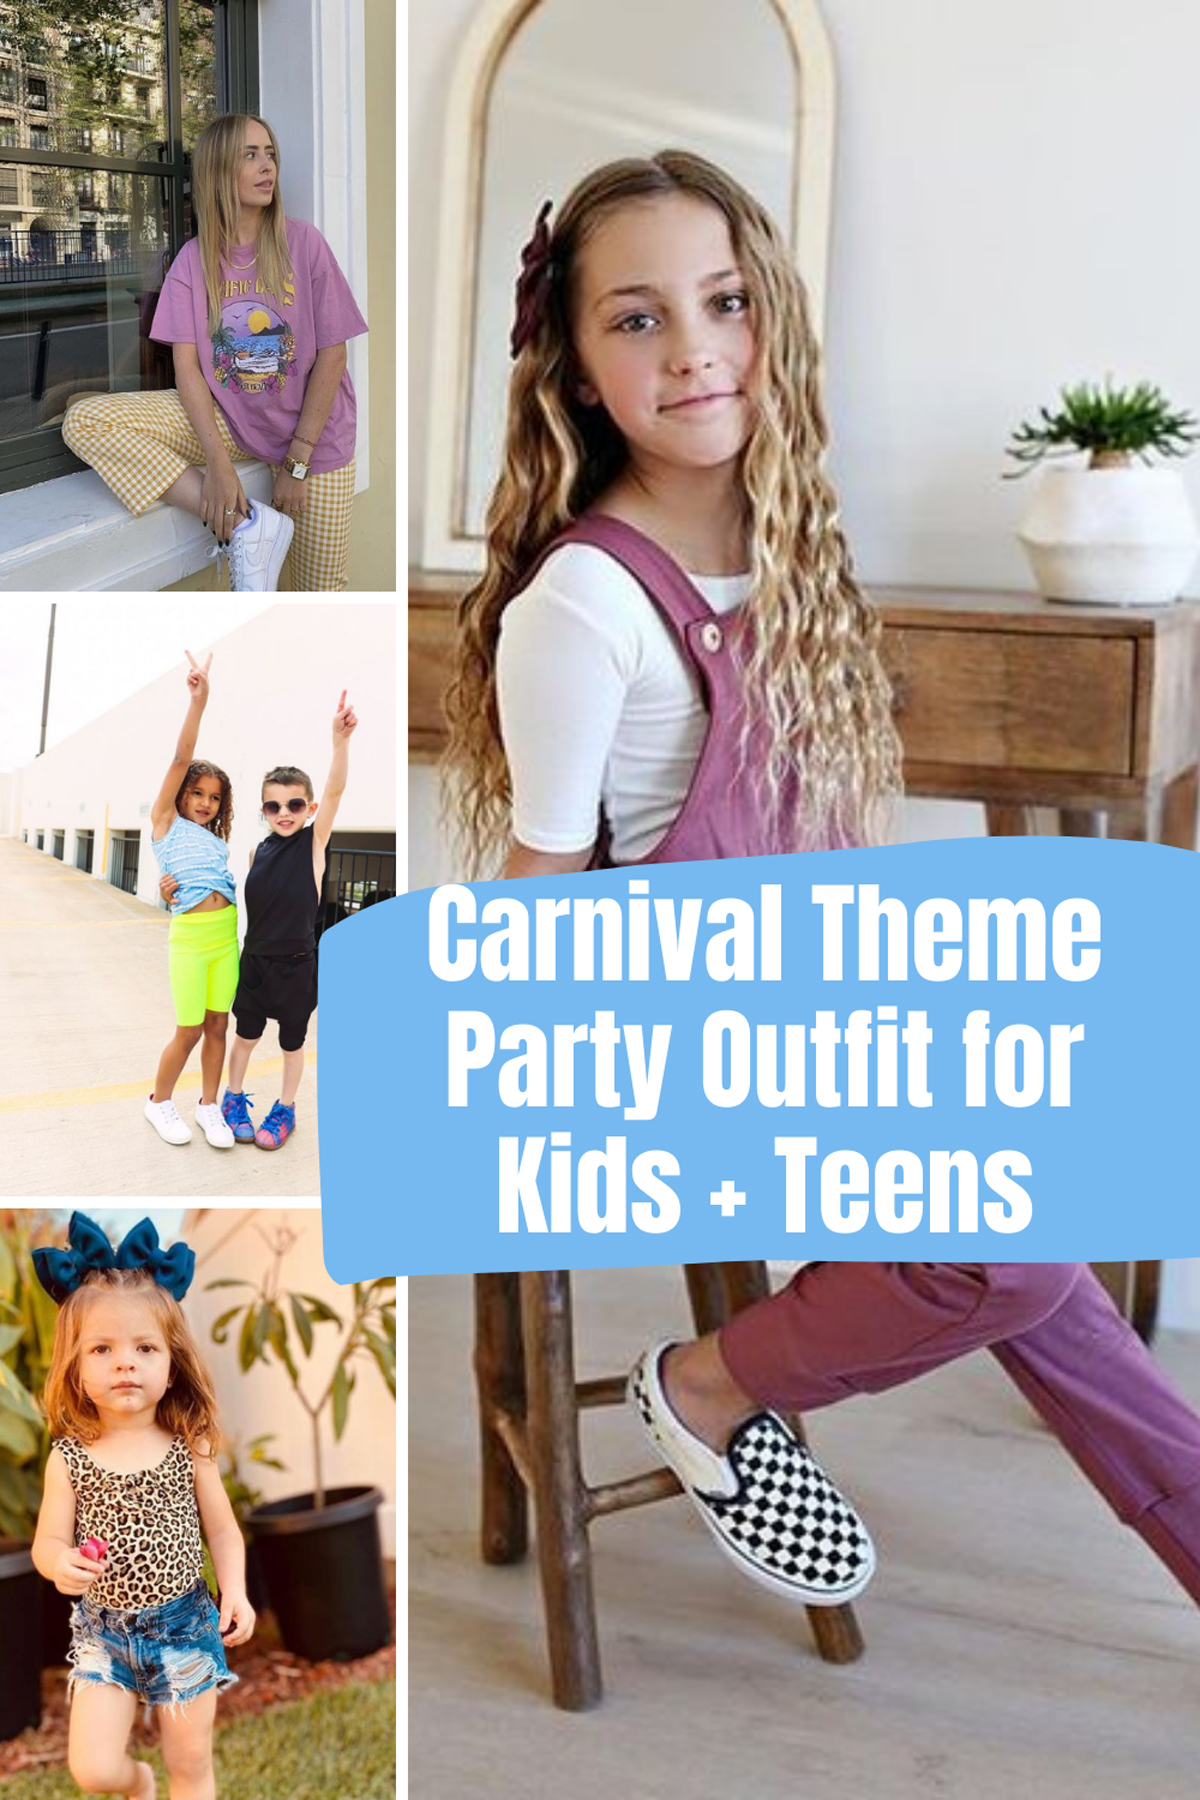 Carnival Theme Outfit Teens & Kids